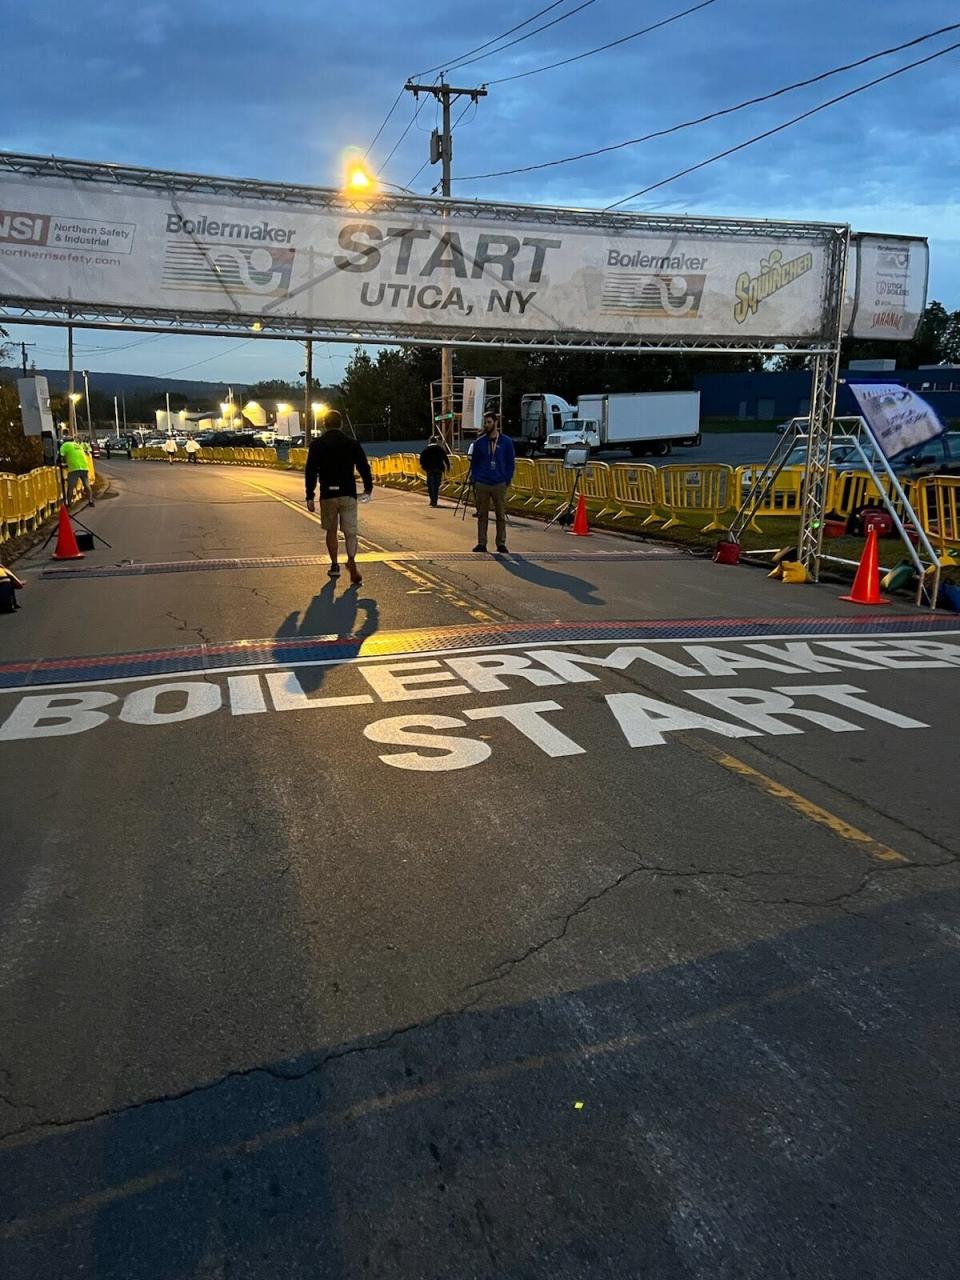 The start line for the Boilermaker Road Race in the early hours of Sunday, Oct. 10, 2021. Runners were preparing for the 44th race.